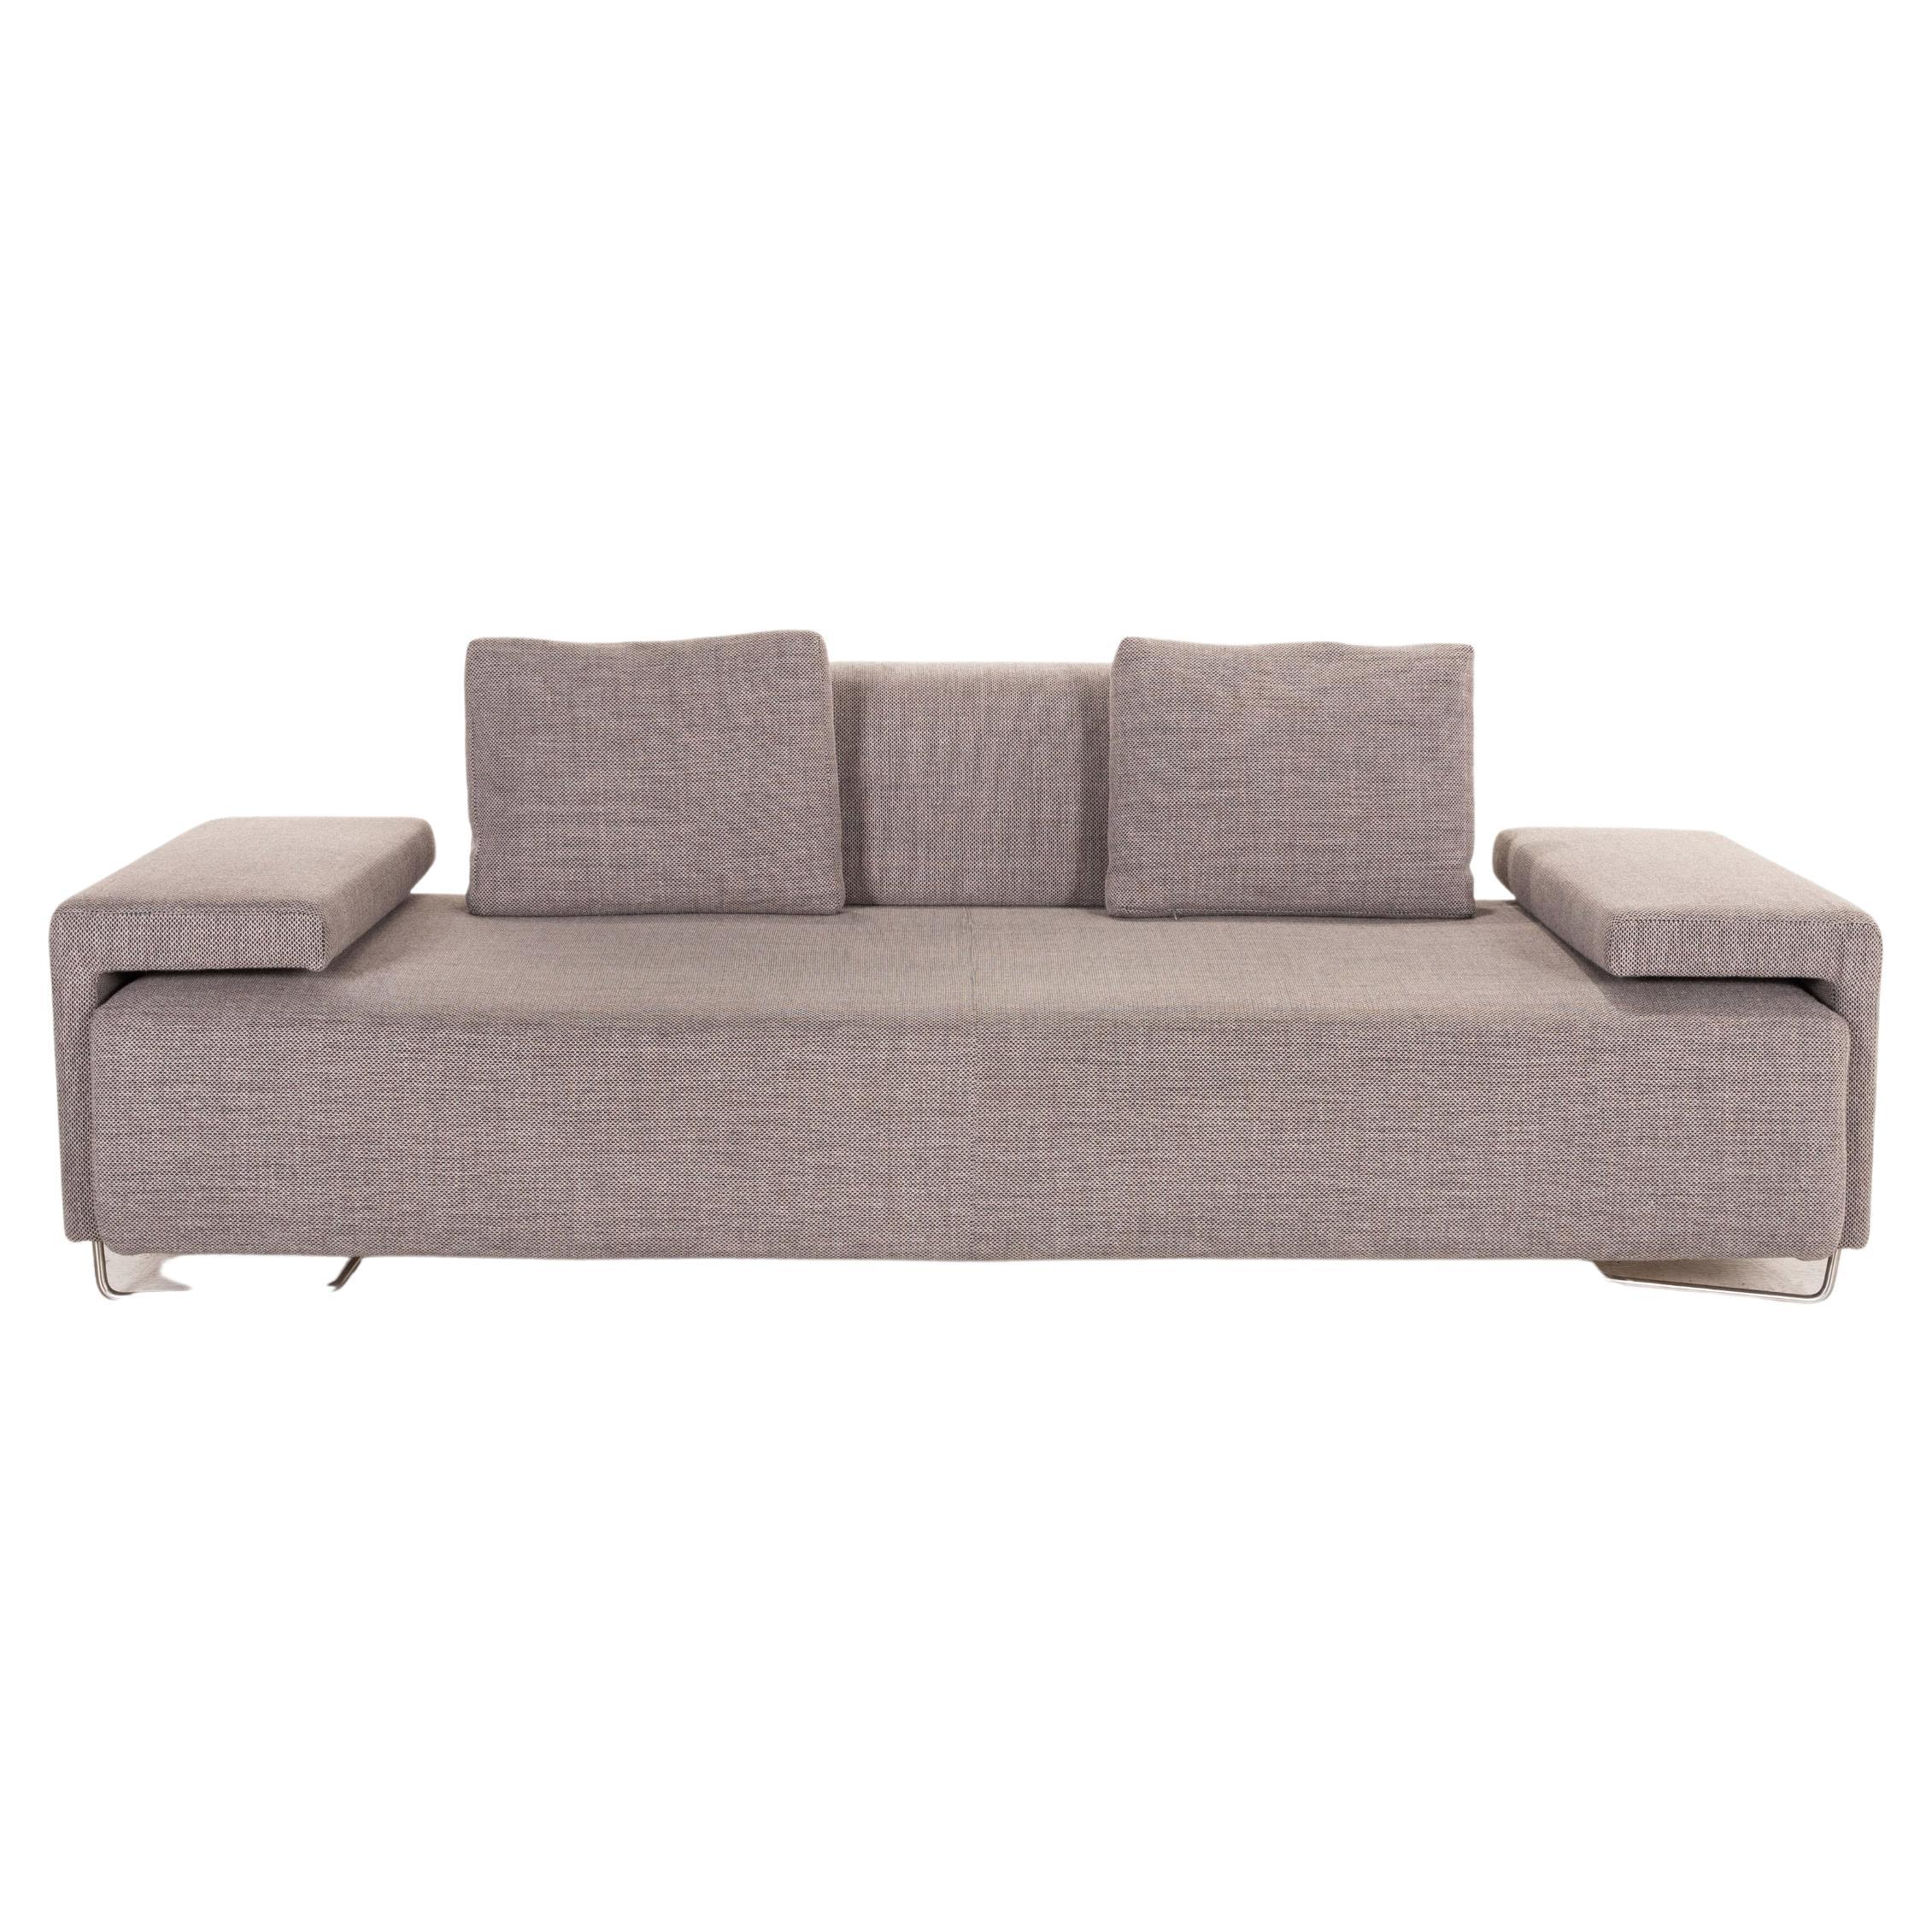 Moroso Lowland Fabric Sofa Three Seater Gray Couch For Sale